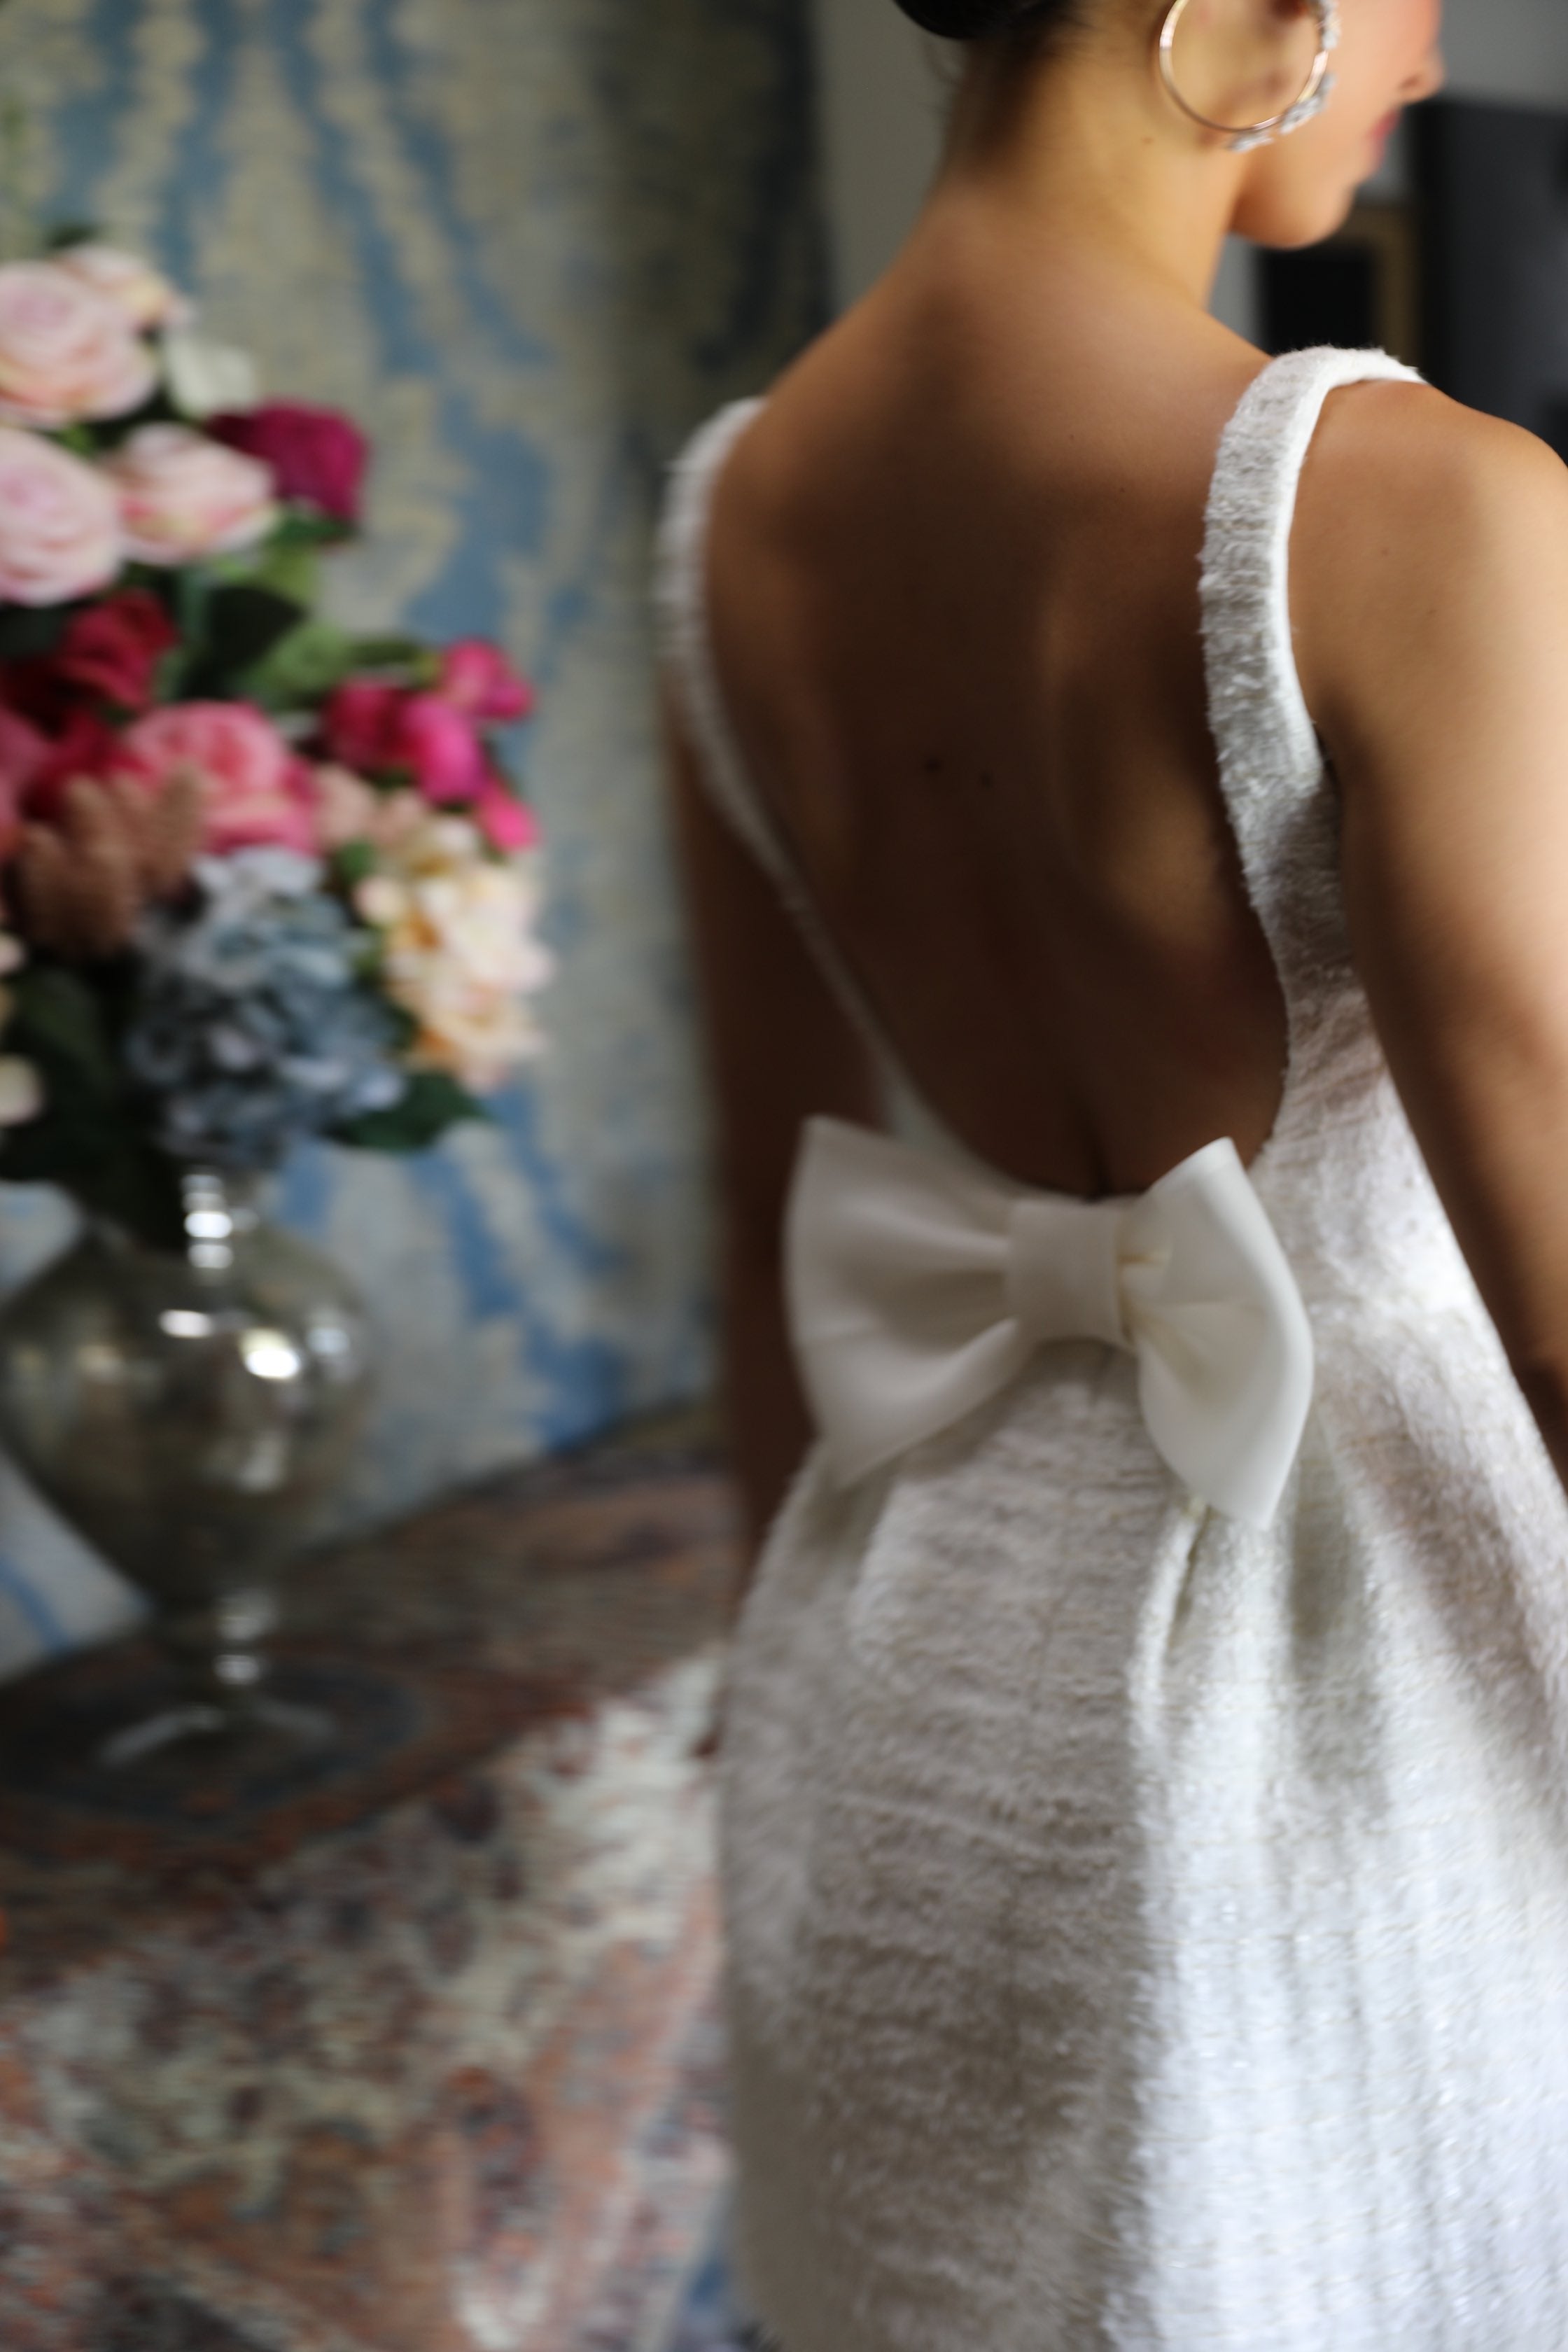 brides low back wedding dress with bow on it and flowers behind her